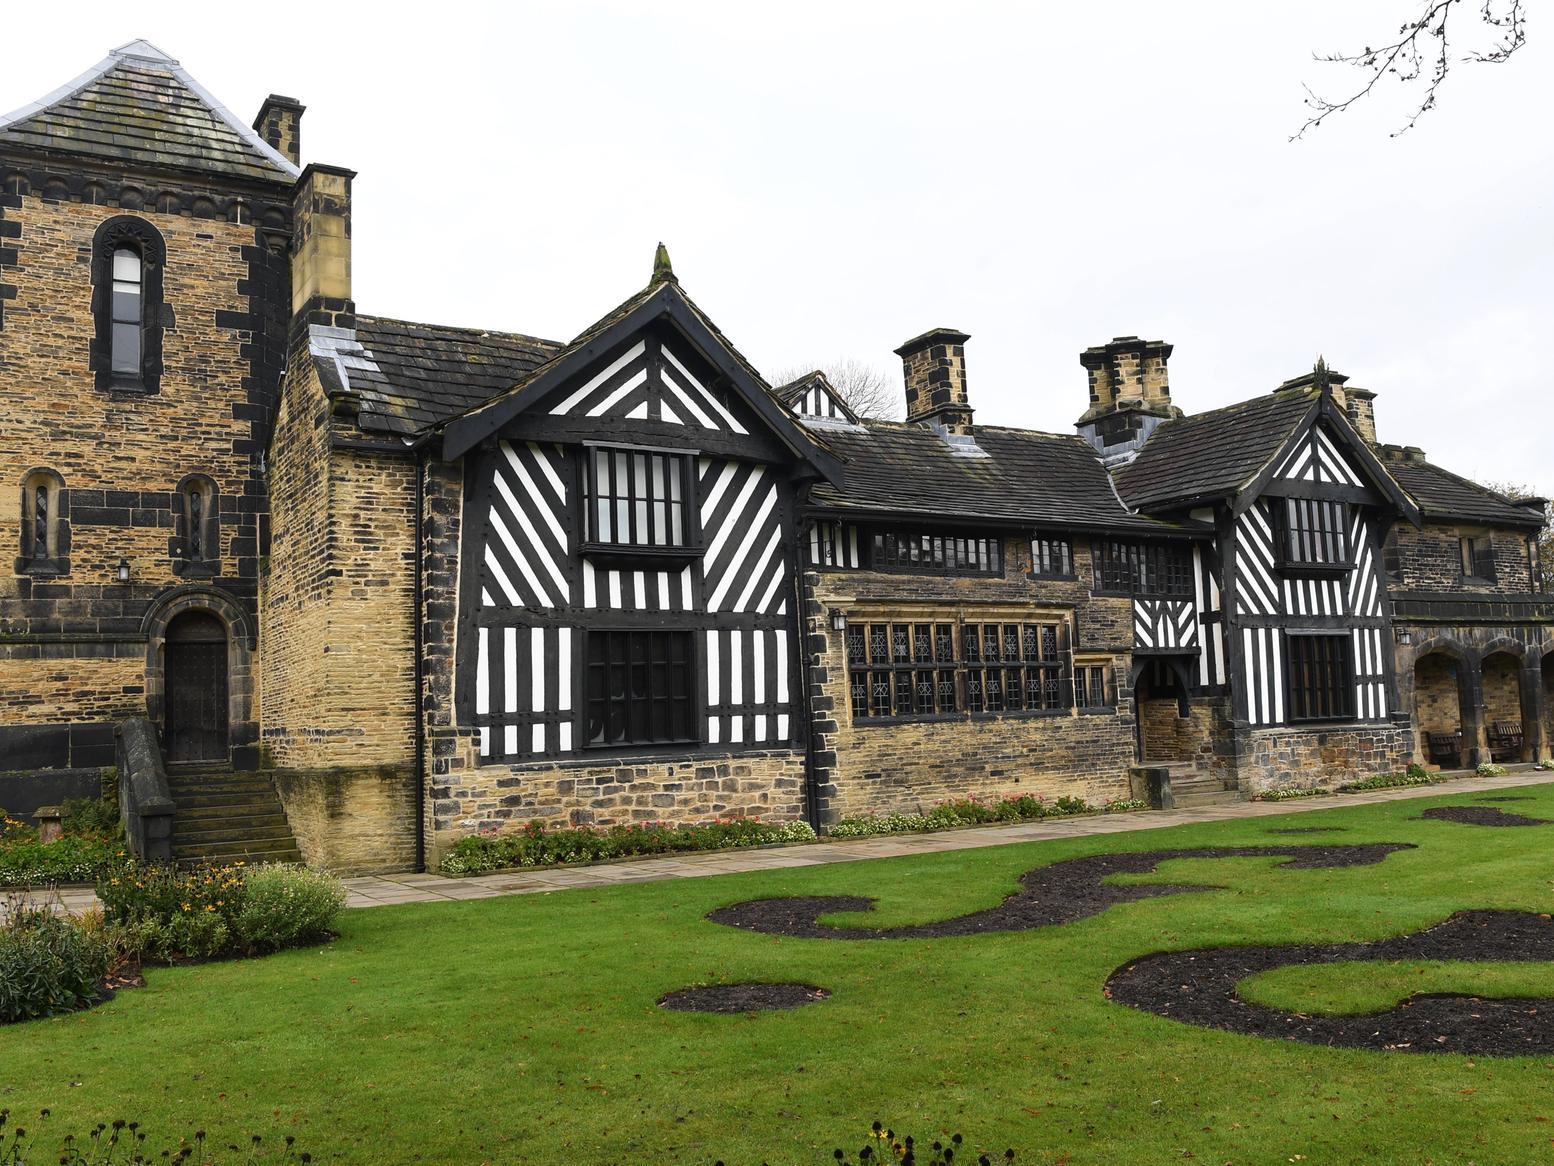 April will see tourists flock to Calderdale for the first Anne Lister Festival. A number of events are set to take place across the month including talks on the 19th century landowners life as well as a walk around Shibden Hall.